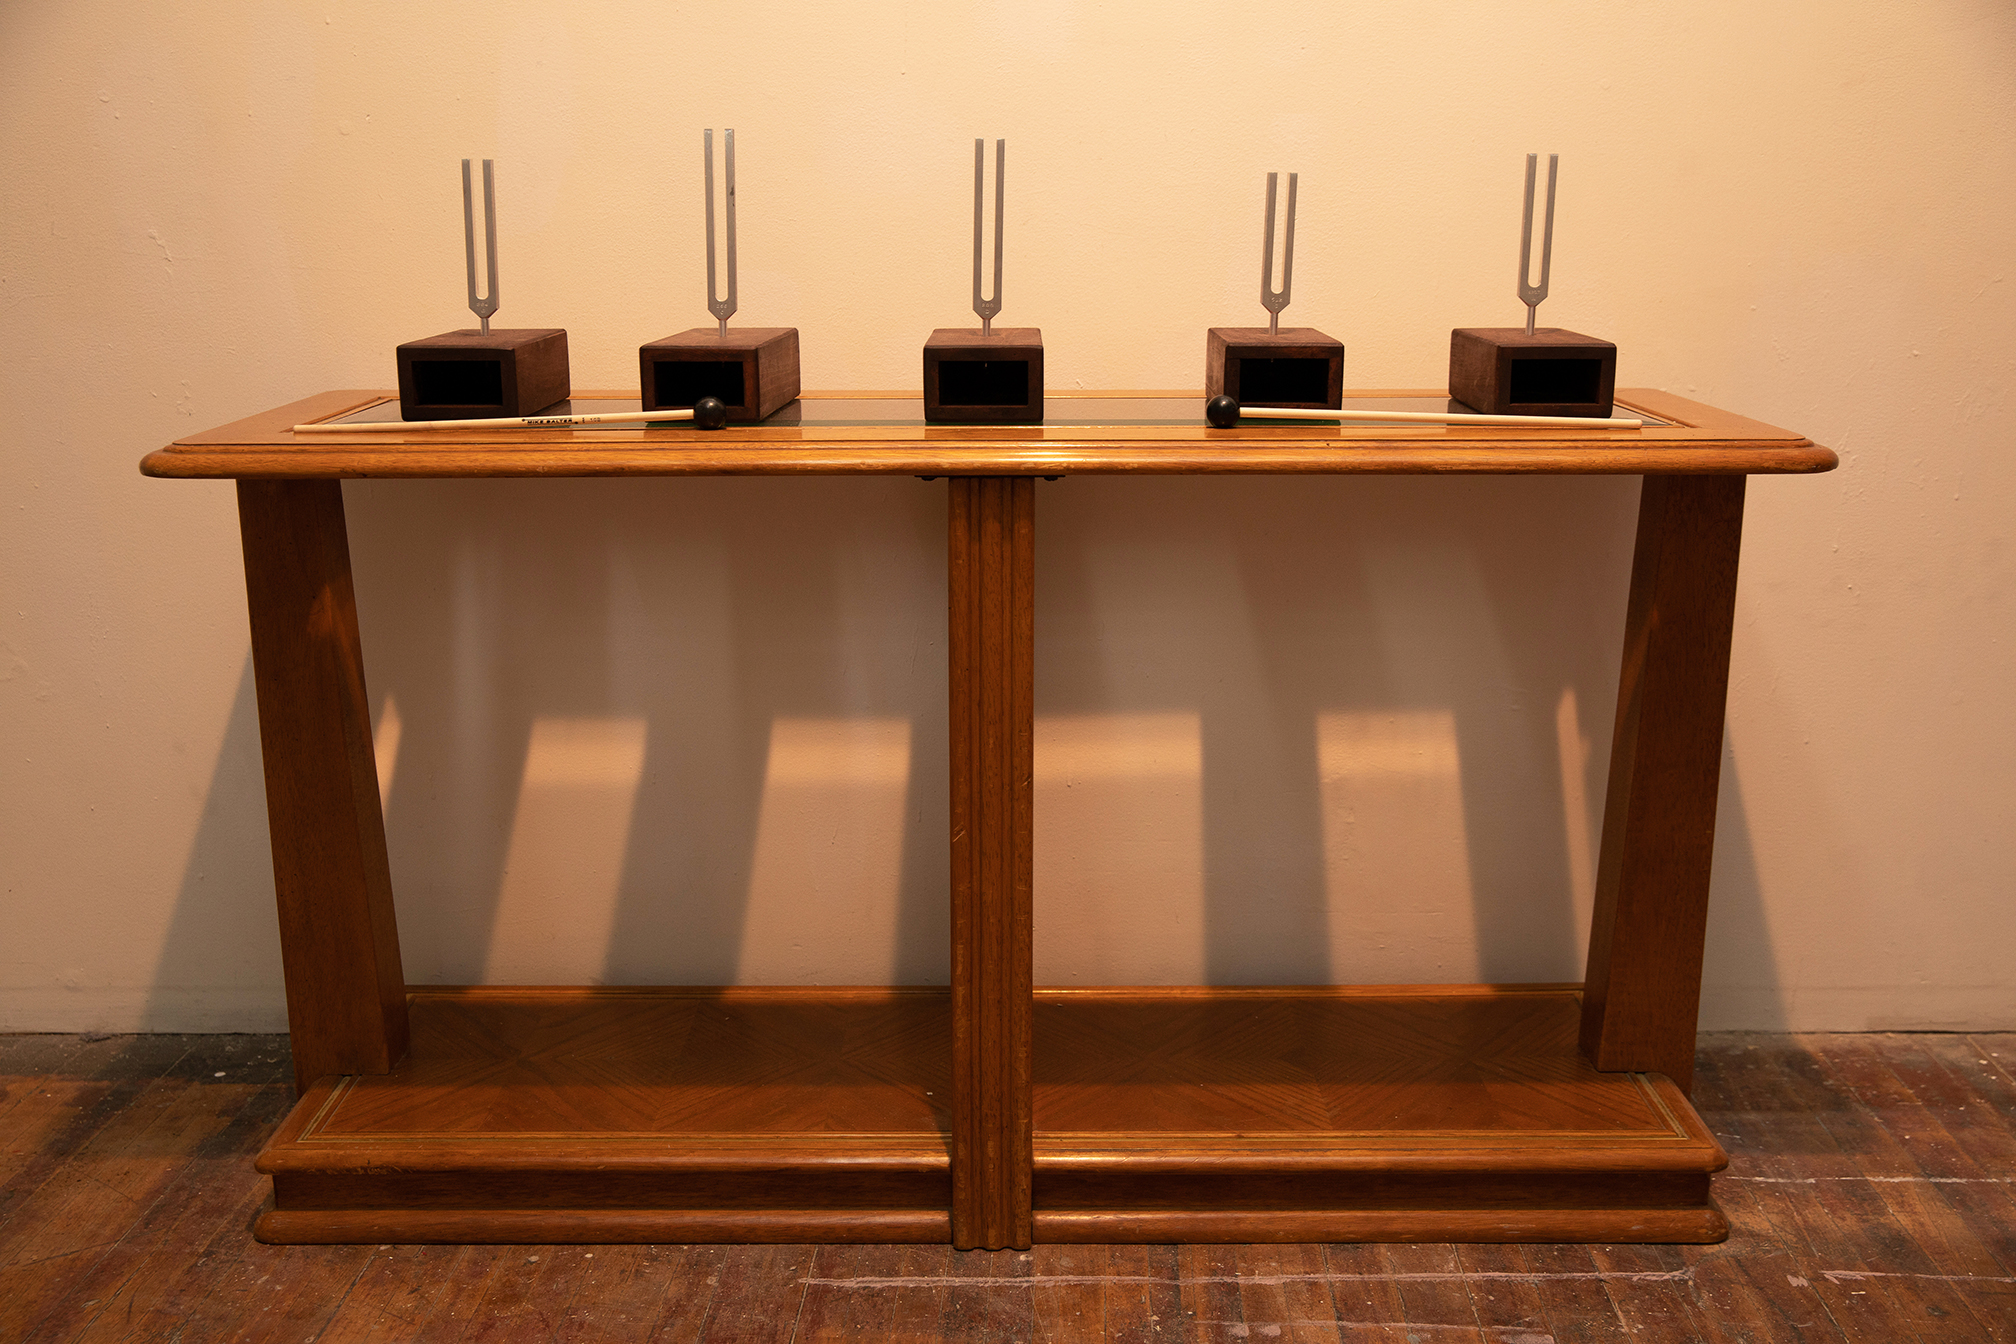 Detail of a small wooden table with five tuning forks set in resanator boxes and two mallets set up on it against a white wall